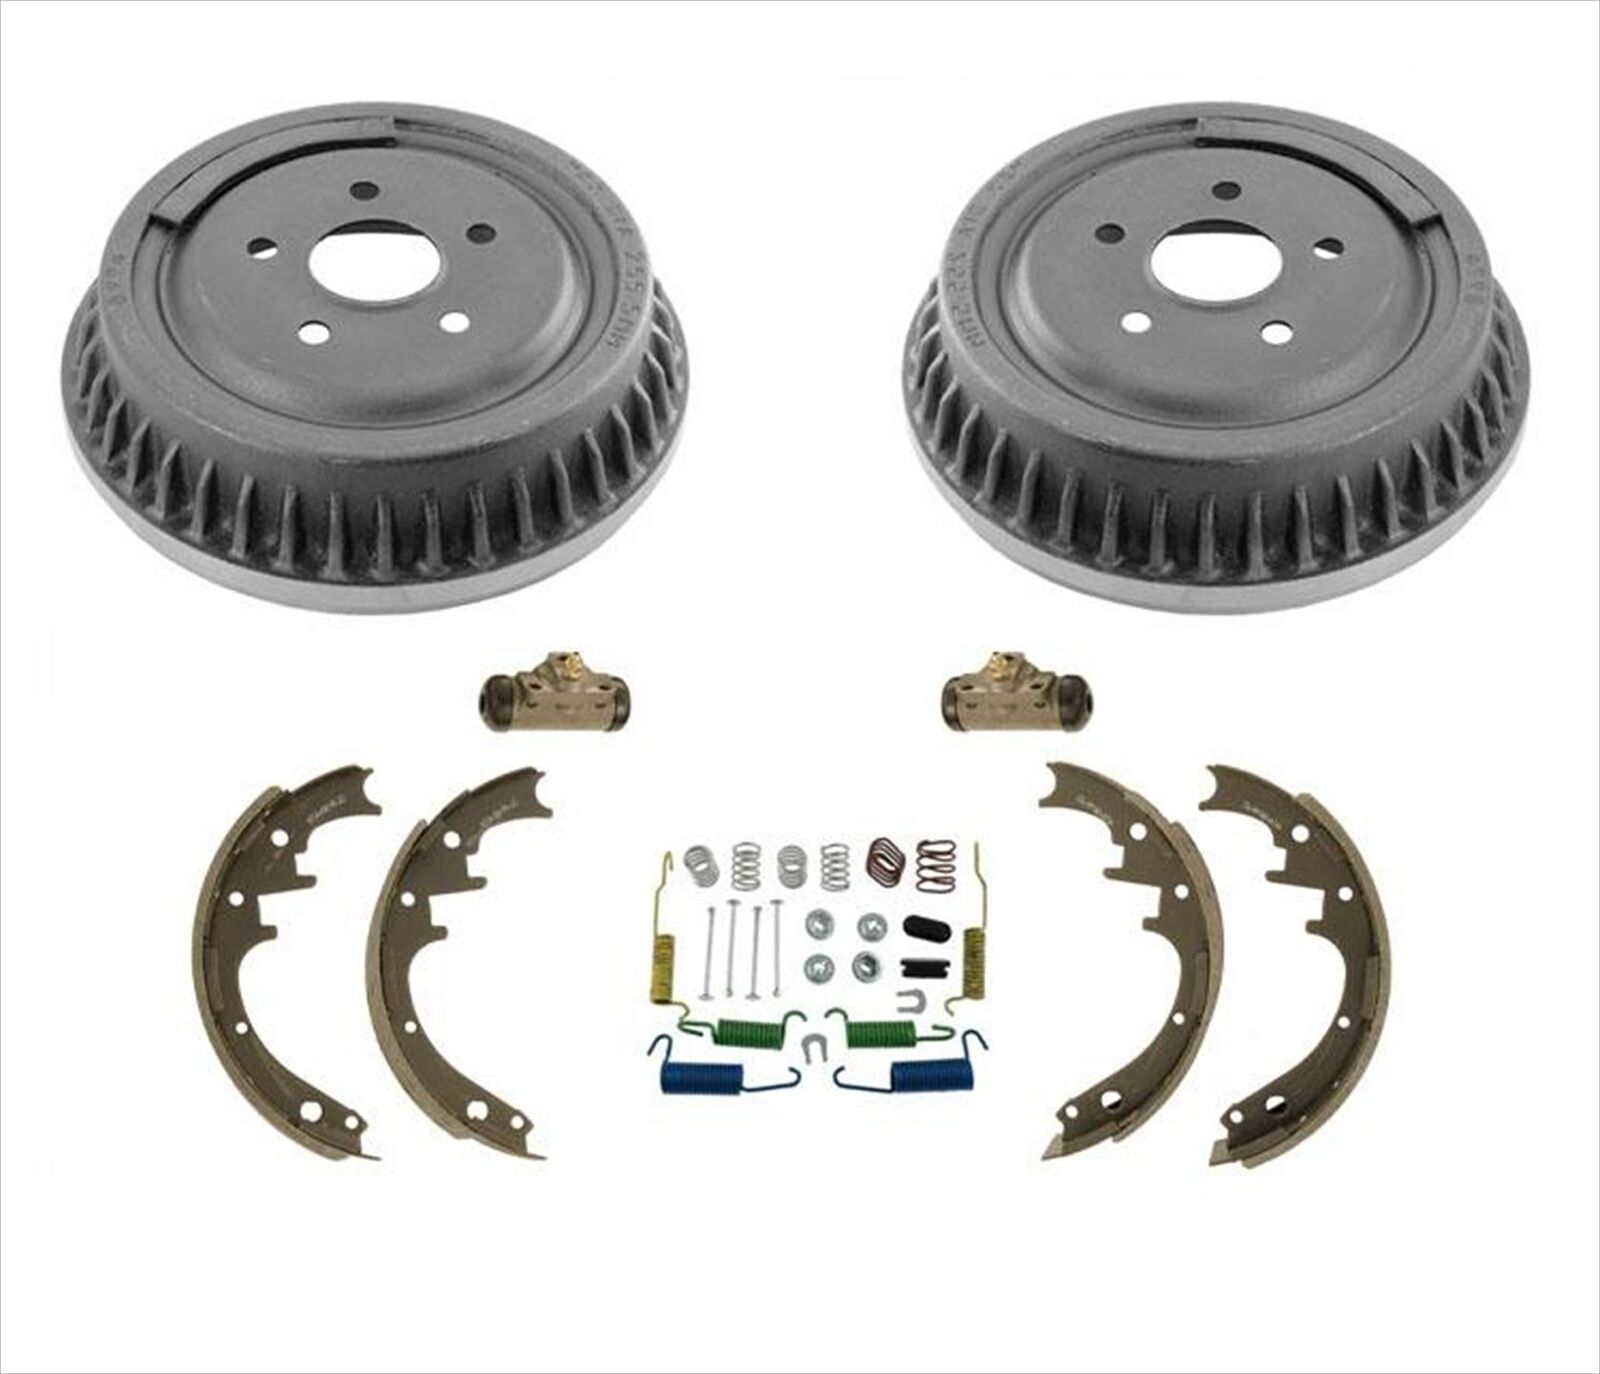 Fits 1993-1997 Ford Aerostar Rear Brake Drums Shoes Springs Wheel Cylinders